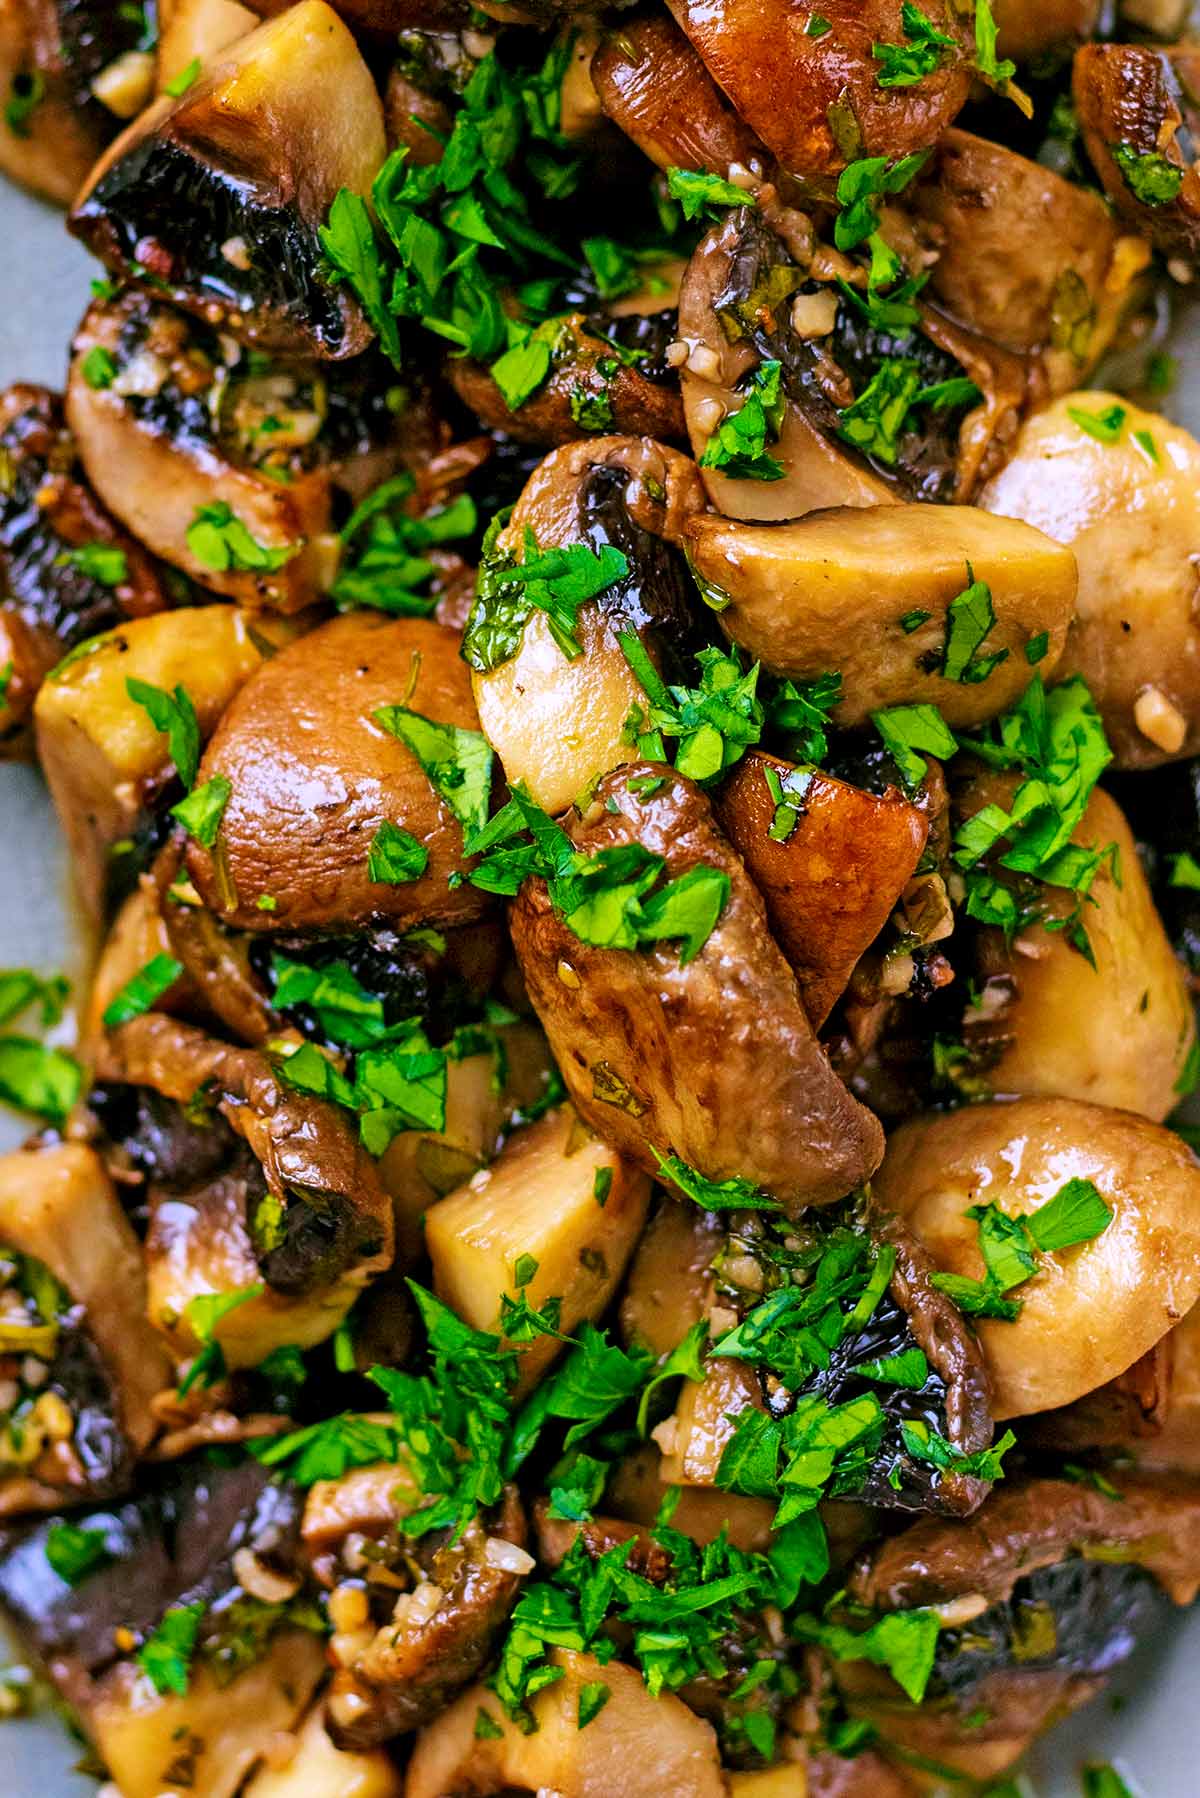 Chopped mushrooms that have been roasted and topped with a sprinkling of chopped herbs.